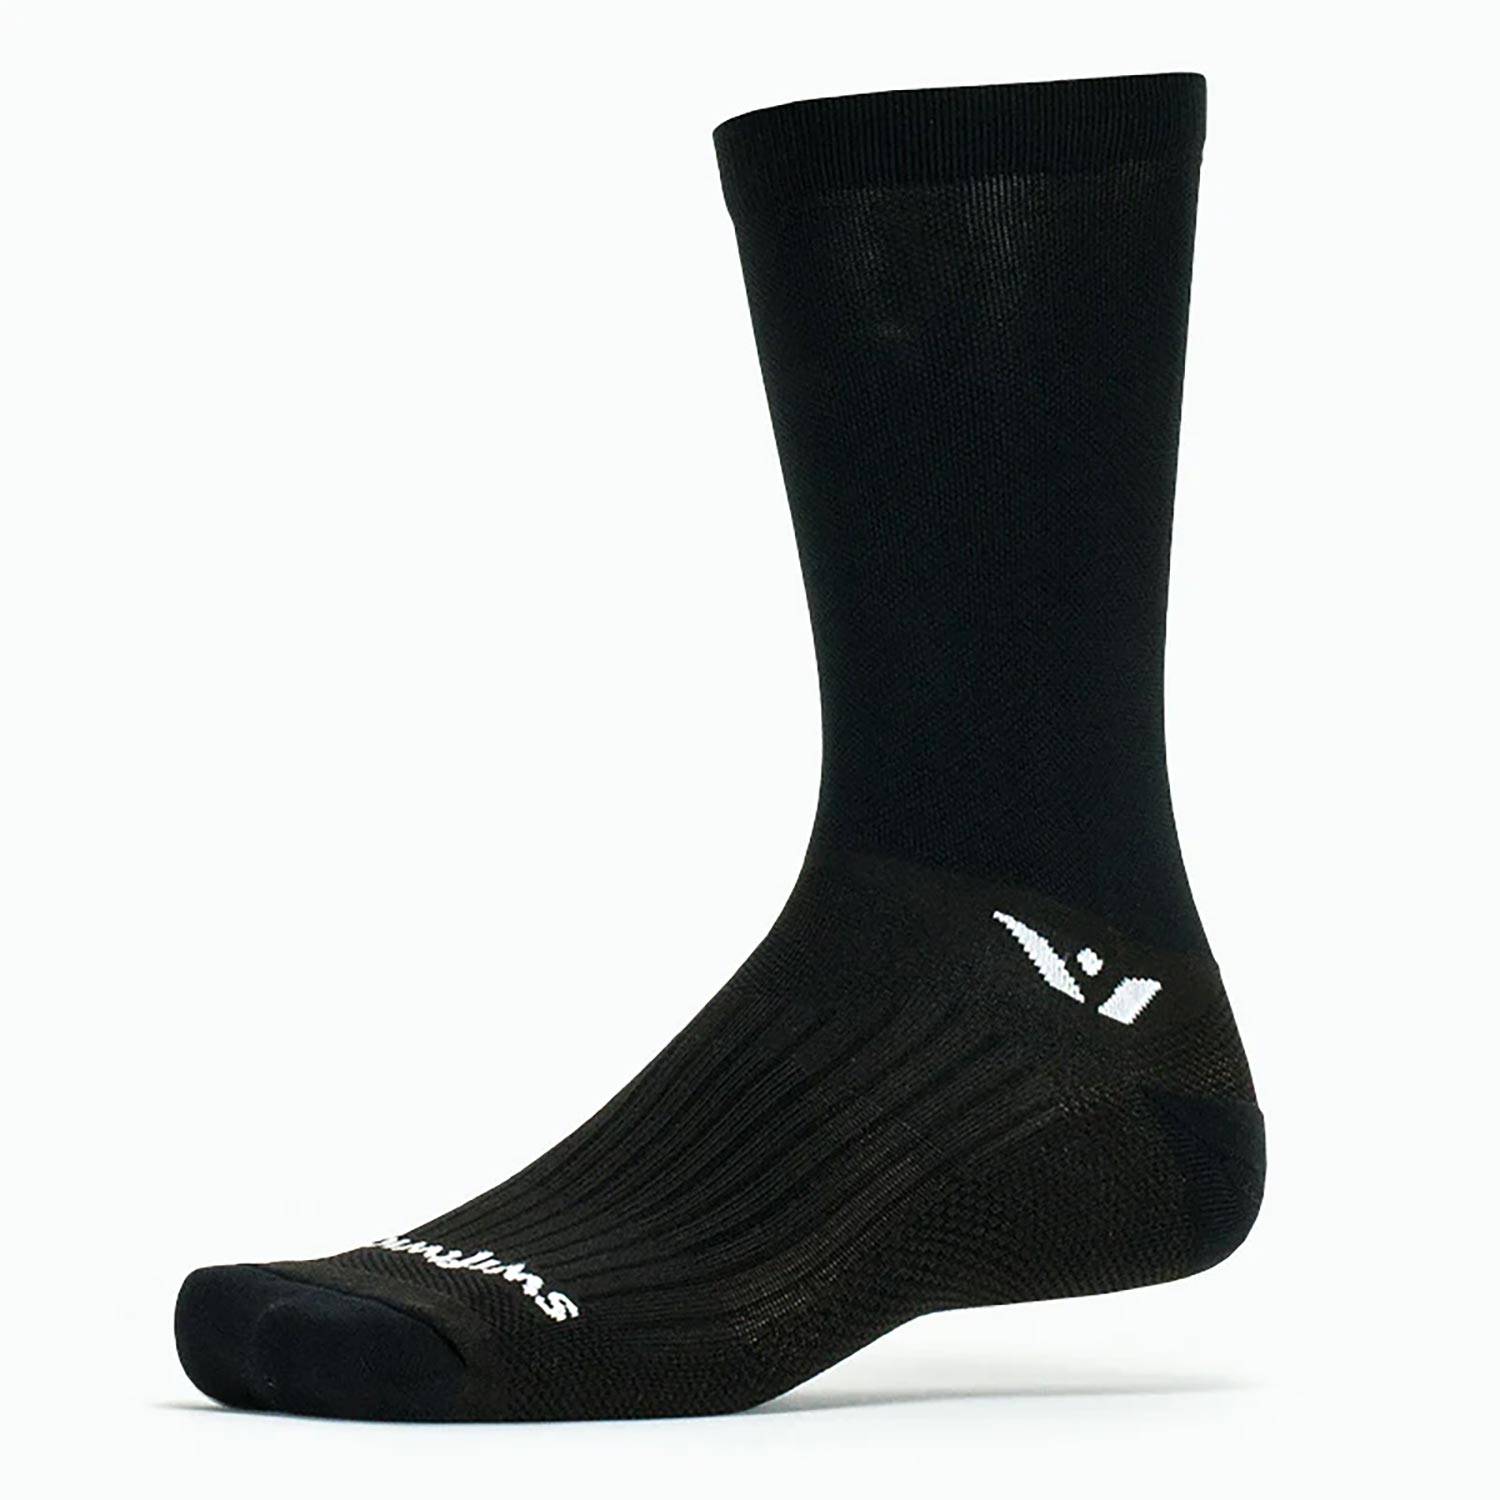 SWIFTWICK 7IN MID CALF PERFORMANCE COMPRESSION SOCK